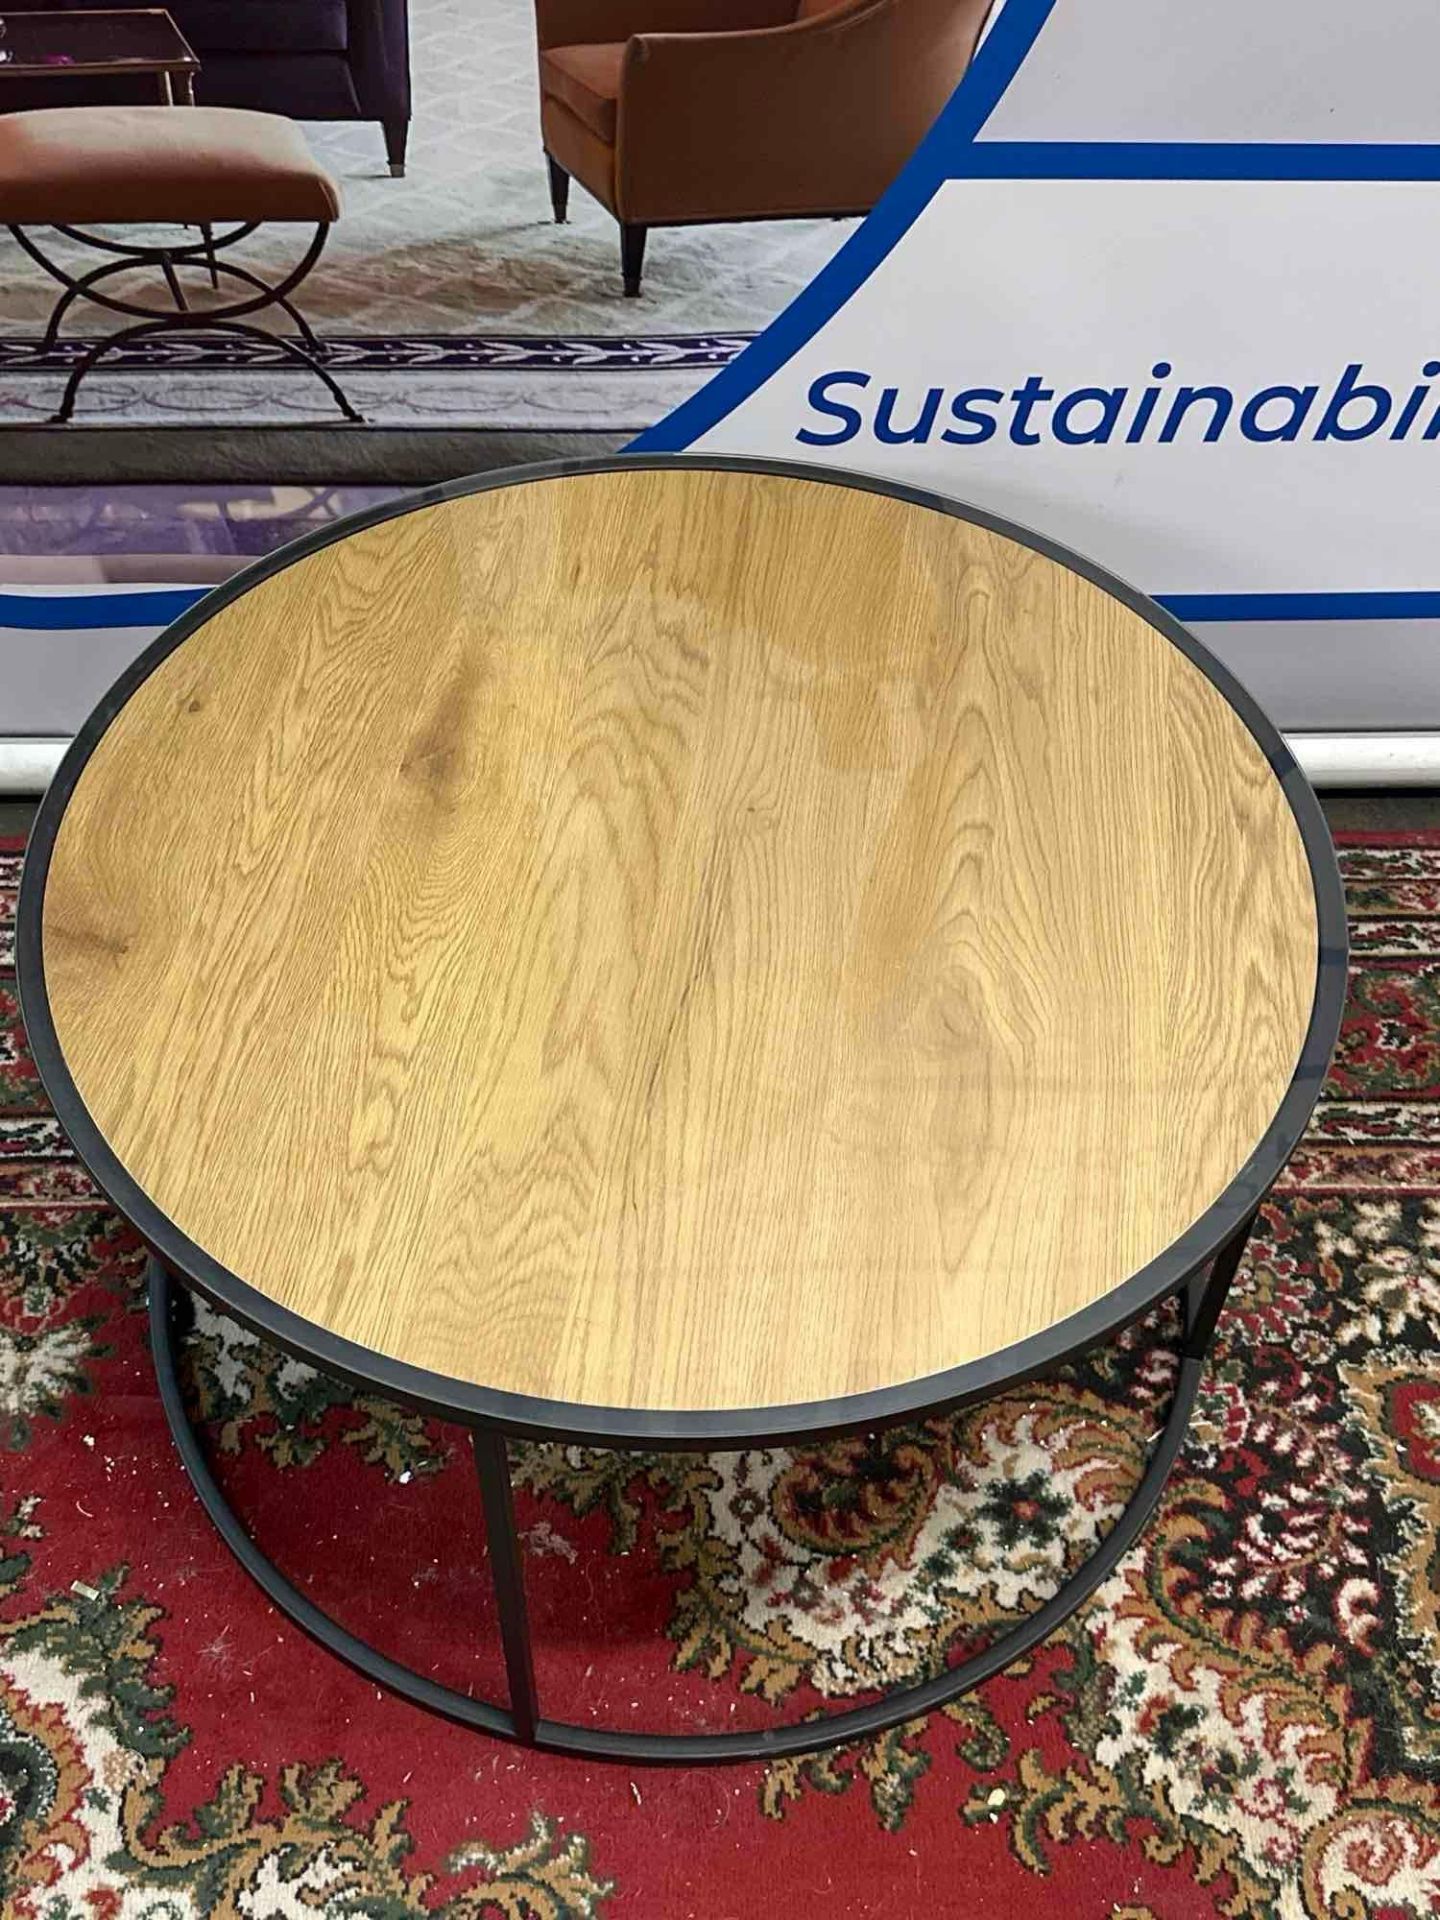 Modern Industrial Style Coffee Table Contemporary Design With A Scandinavian Feel That Would Look - Bild 2 aus 3